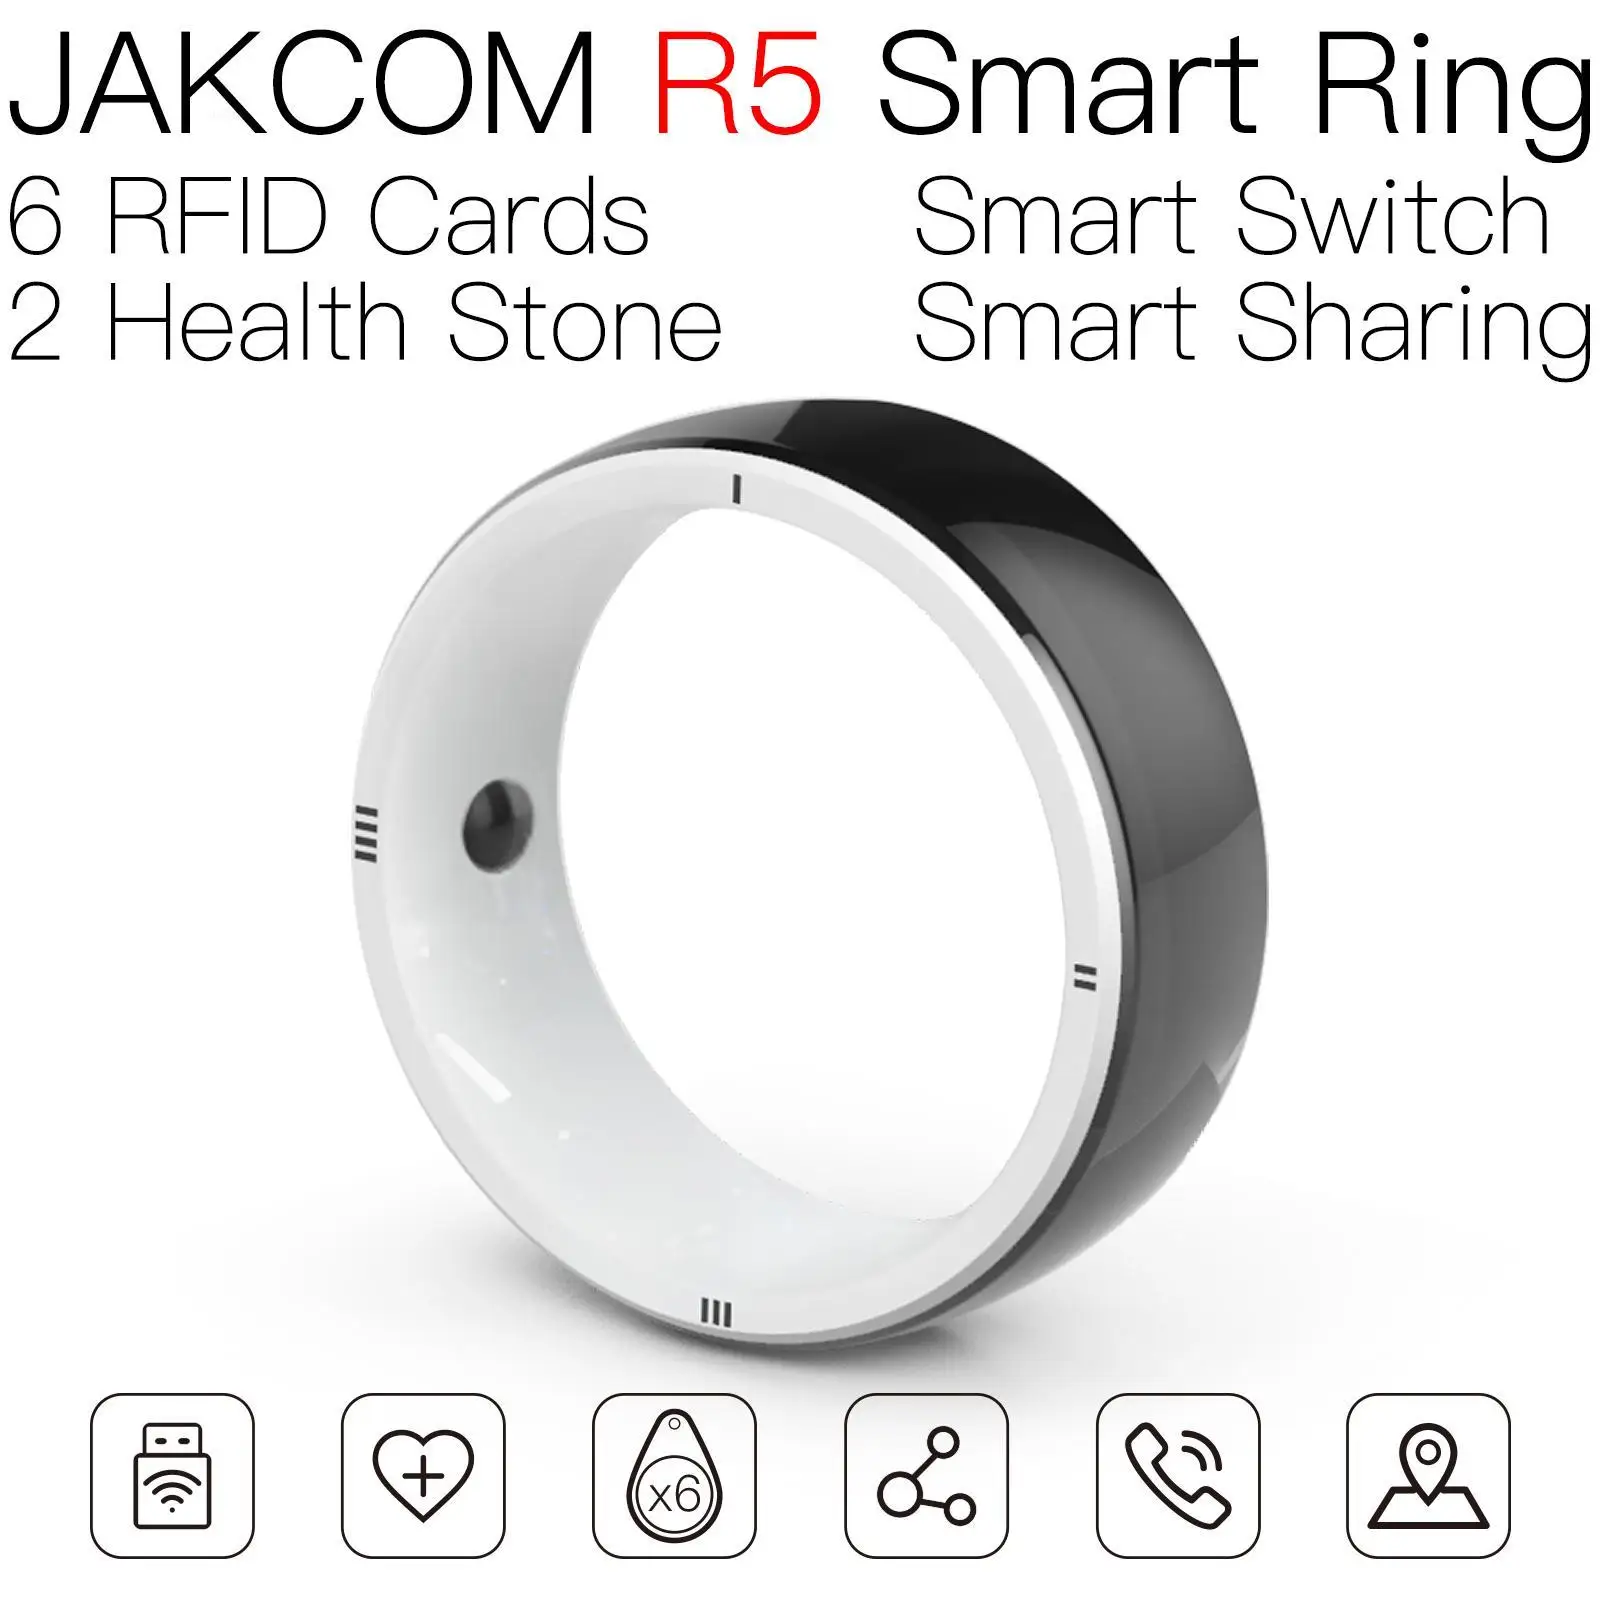 

JAKCOM R5 Smart Ring Newer than pet annimal crossing new horizon uid changeable nfc name buttons for tagging